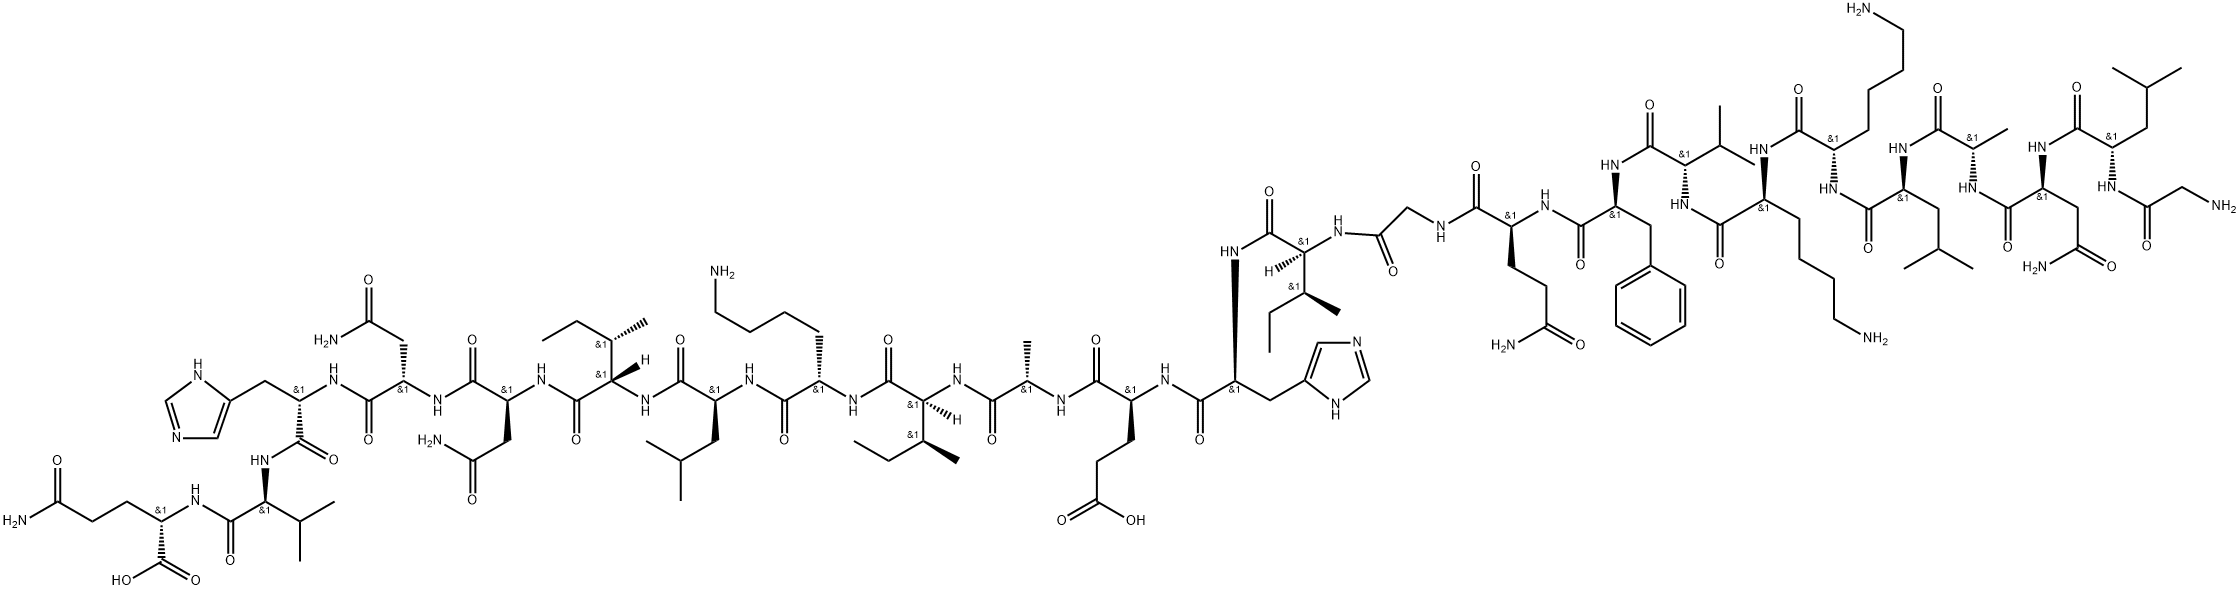 Pseudin-2 Structure